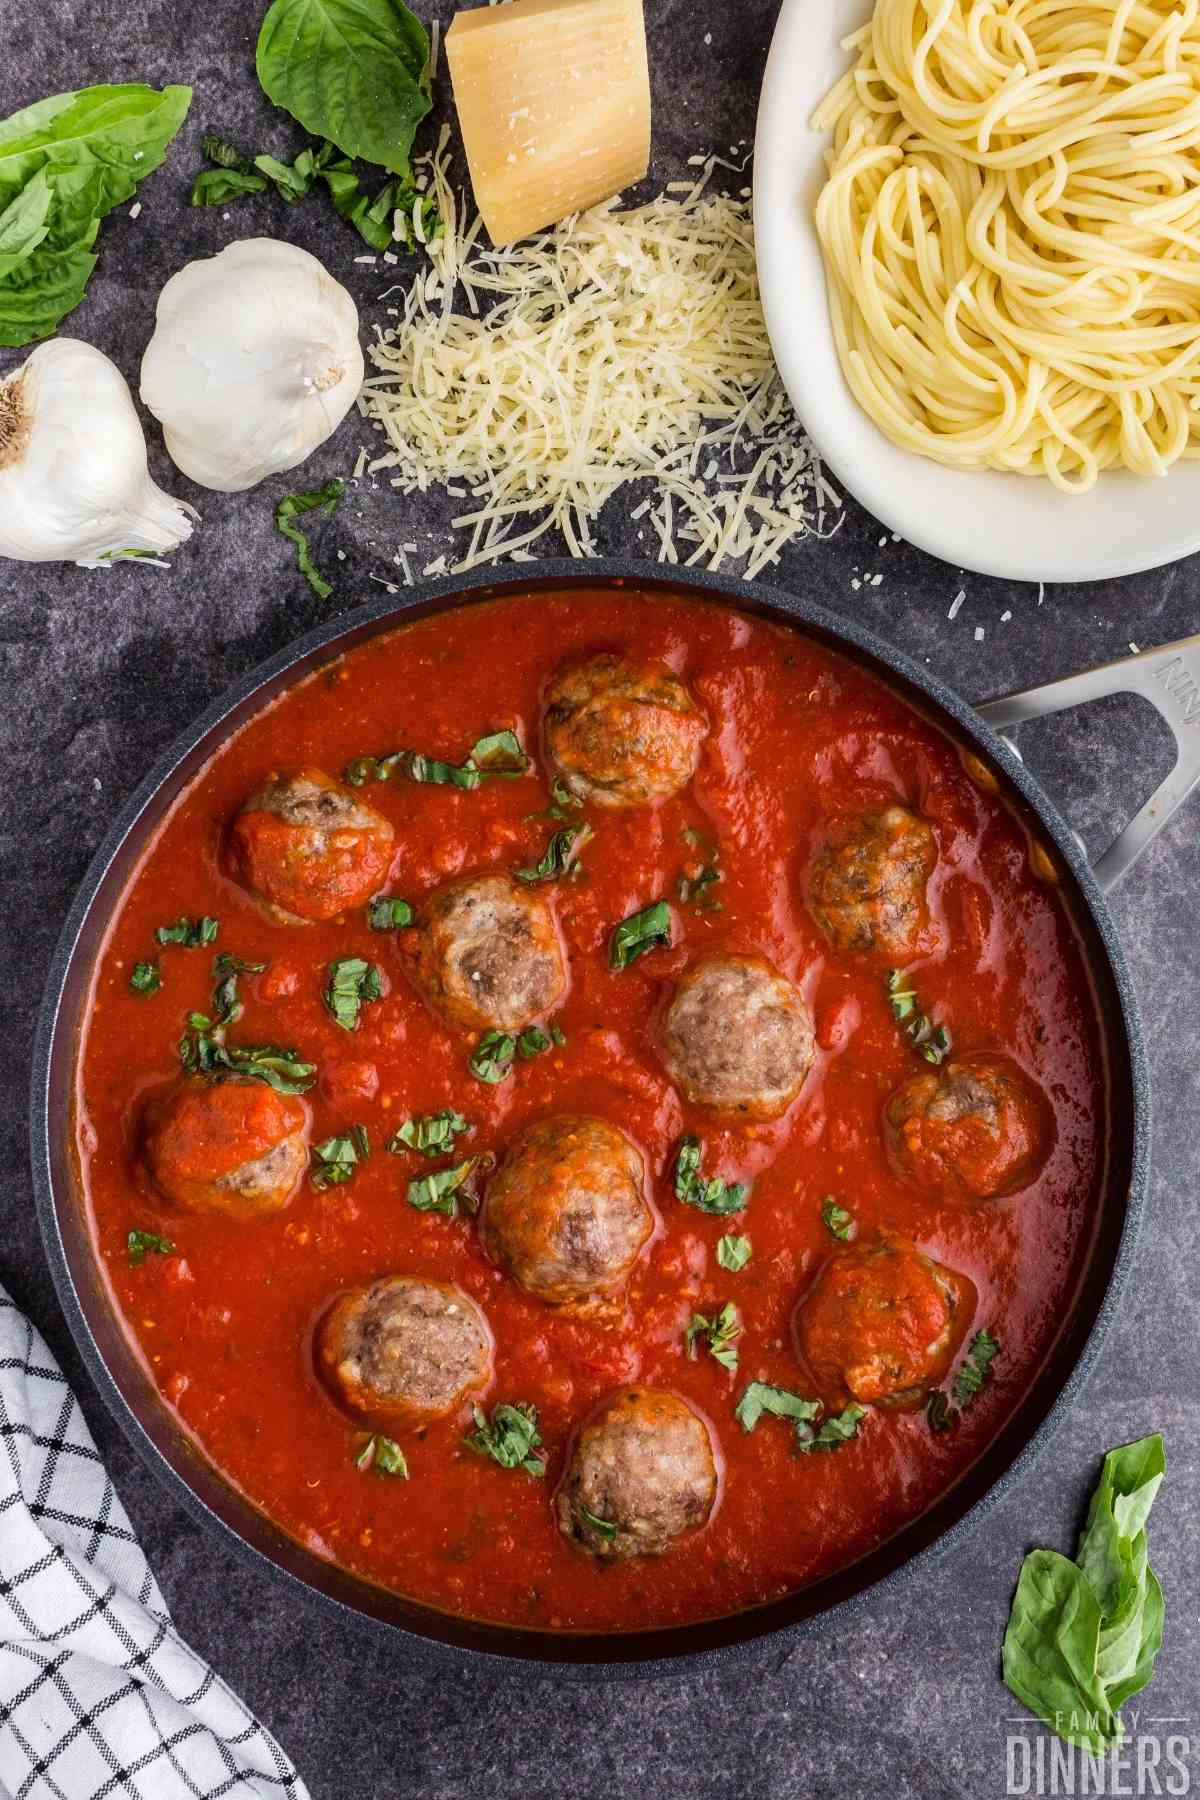 birds eye view of a black large saute pan on a dark gray counter. Pan is full of red marinara sauce, large cooked meatballs and sprinkled with fresh slices of basil.